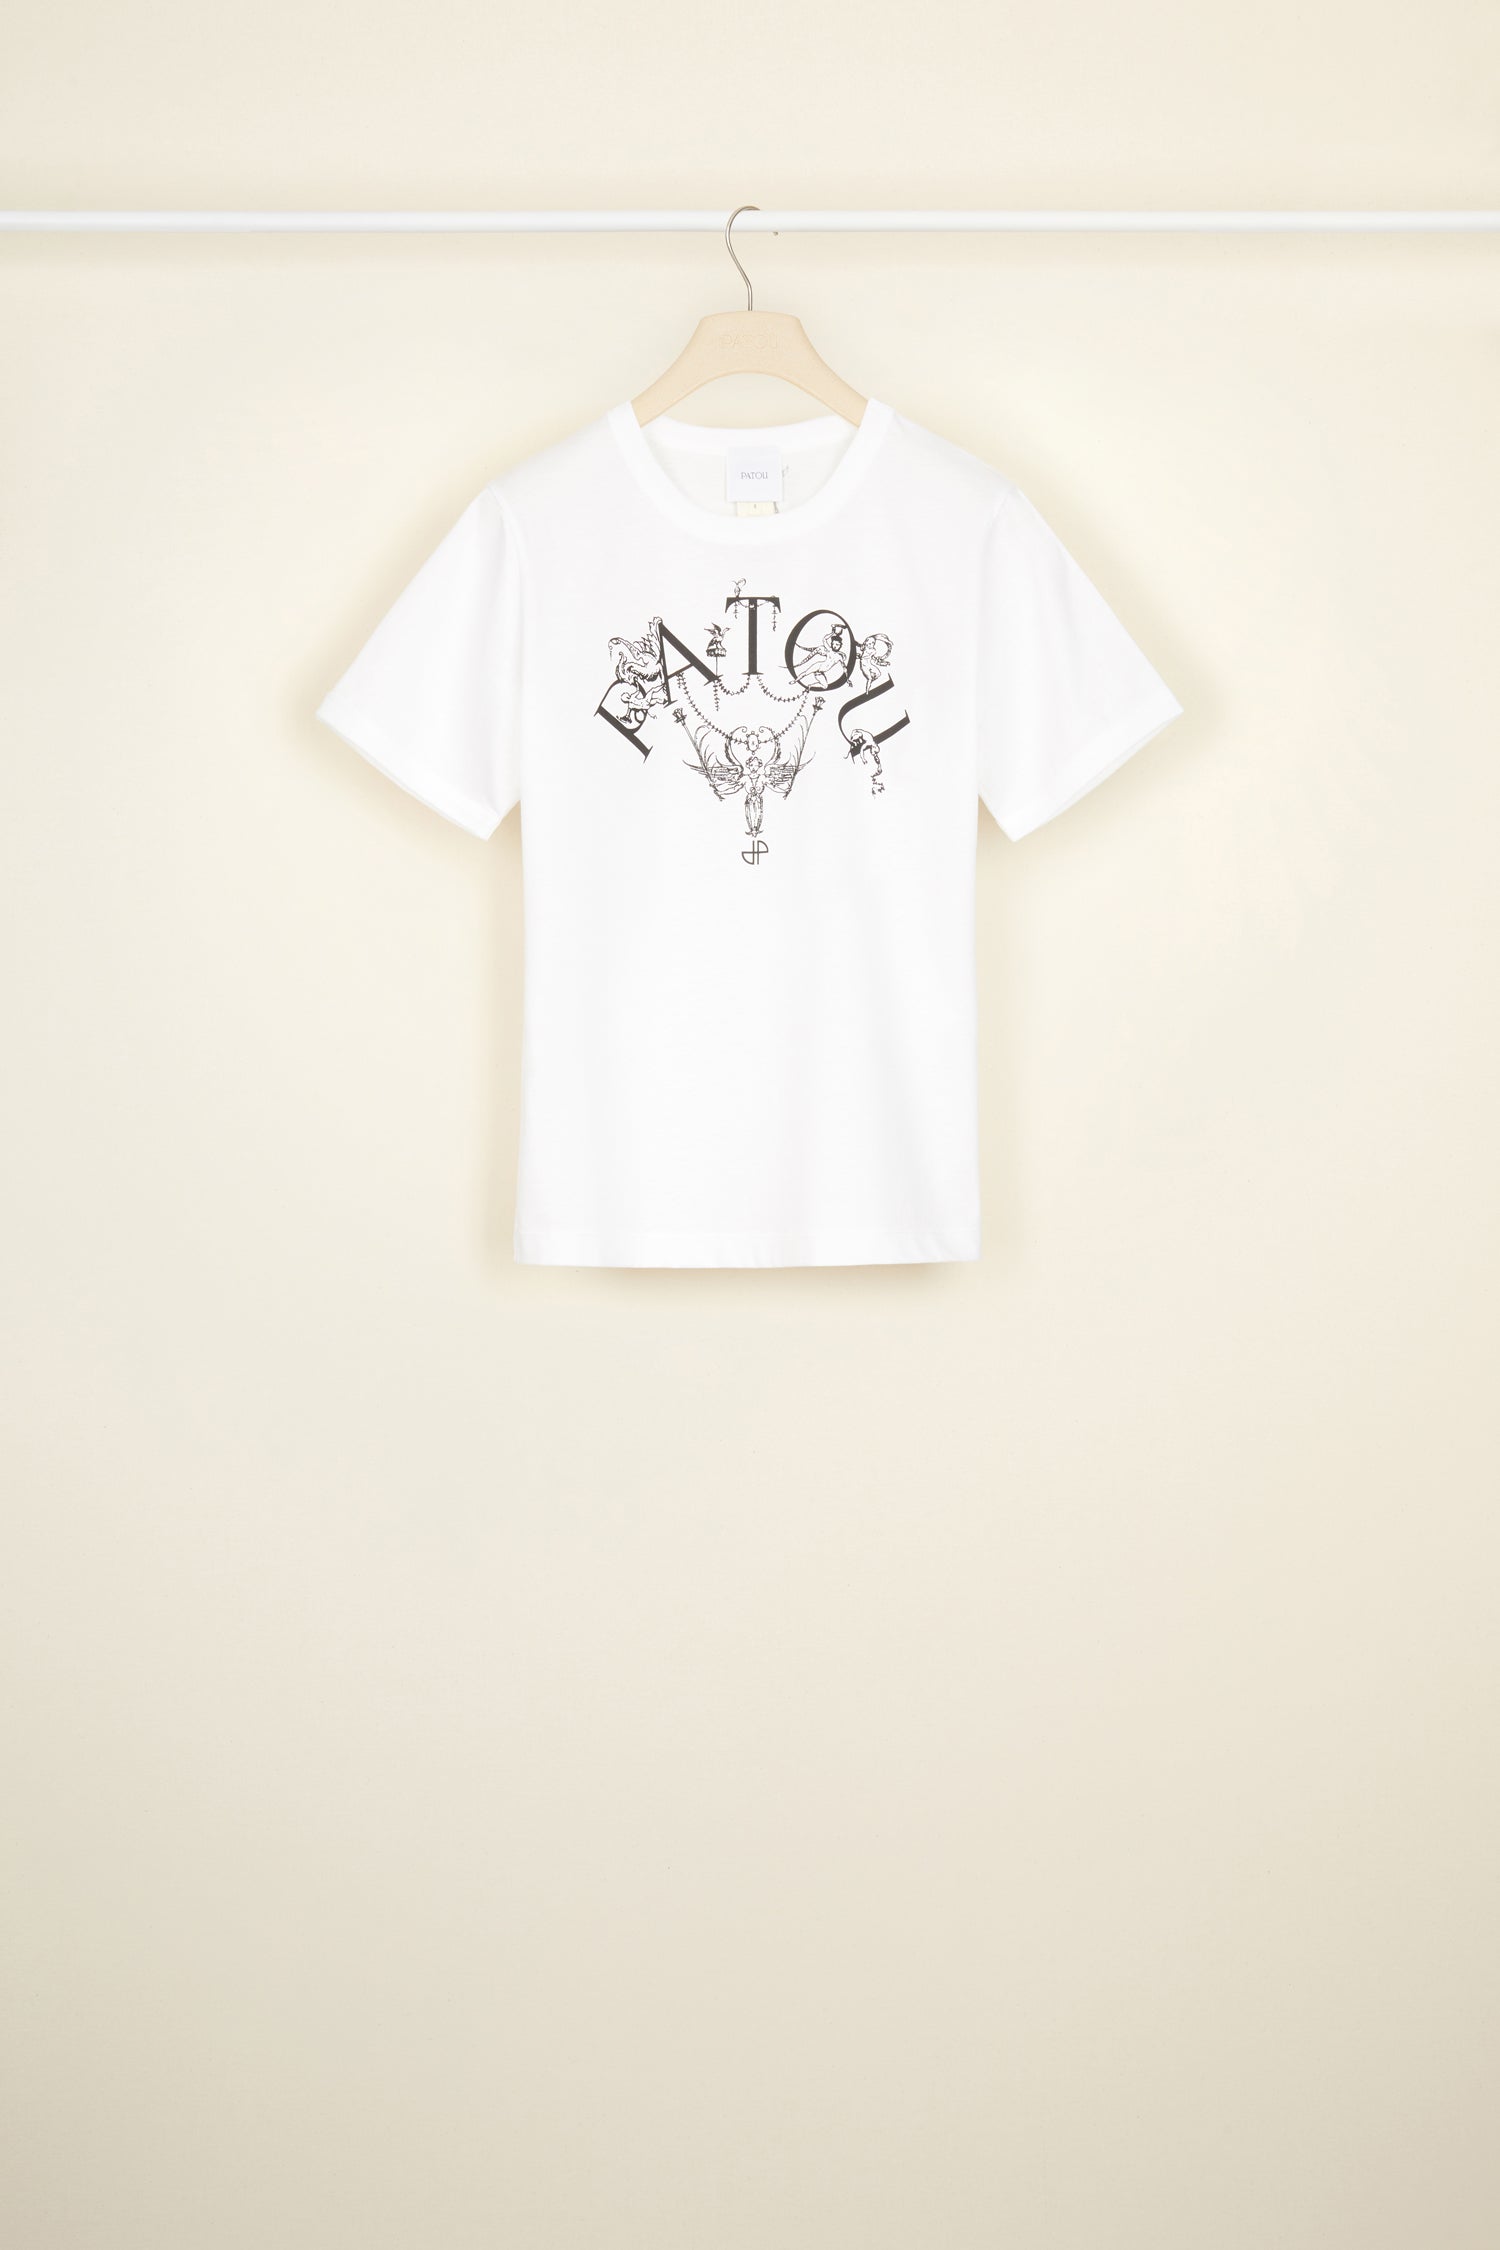 Patou | オーガニックコットン パトゥ Tシャツ Stories and Tales